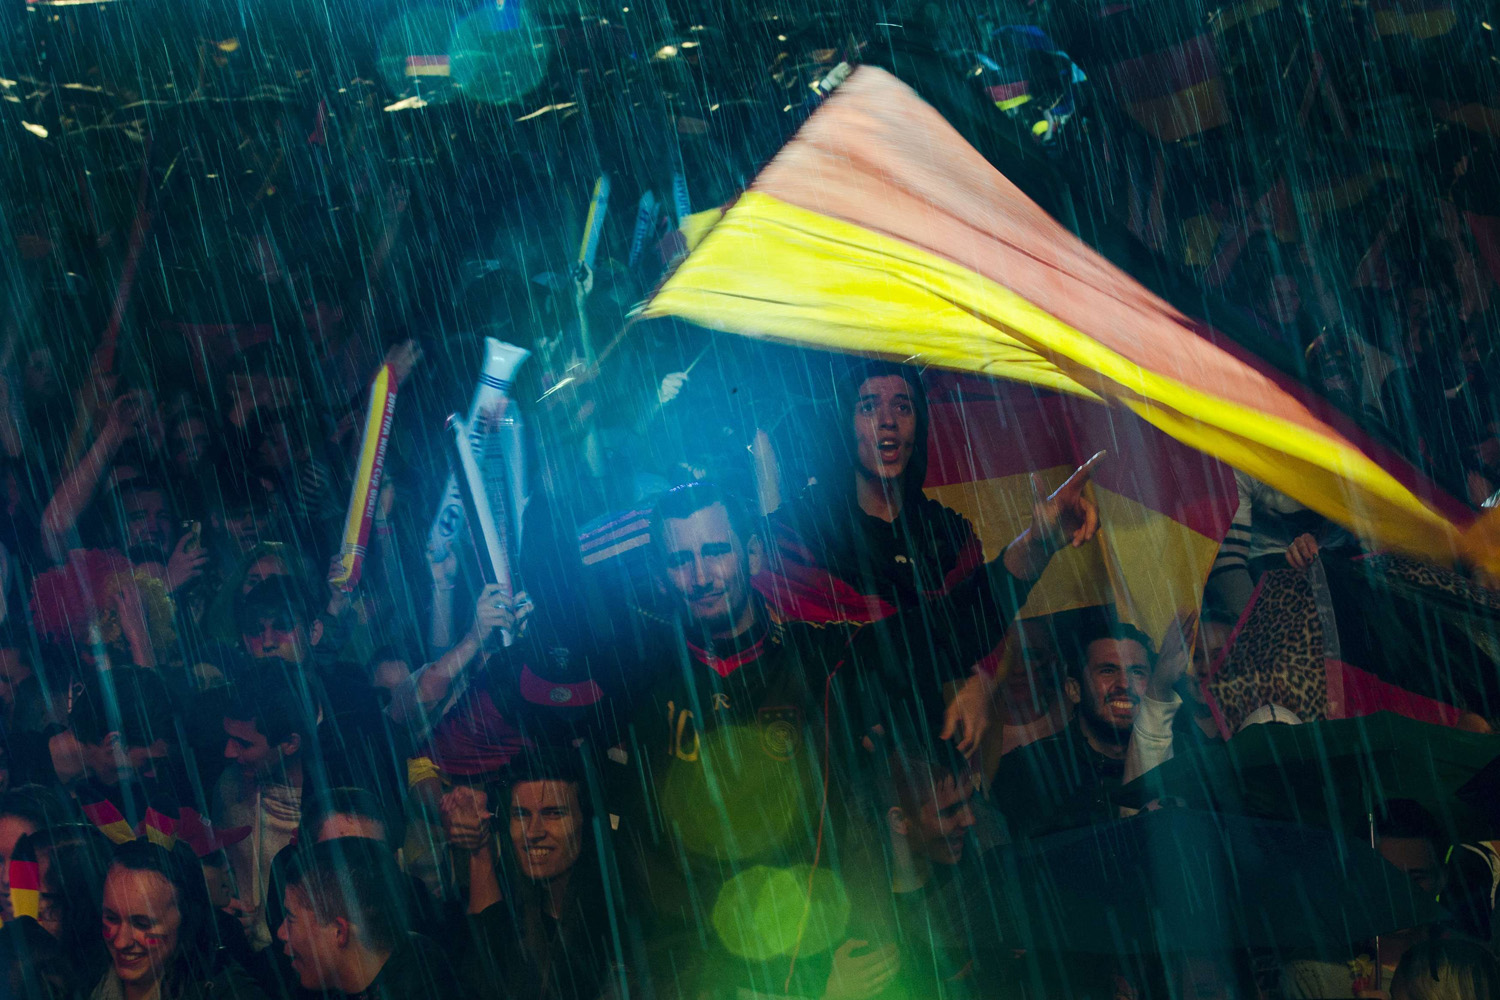 People watch Germany play against Algeria during their 2014 World Cup round of 16 game, during heavy rain at public viewing arena in Berlin